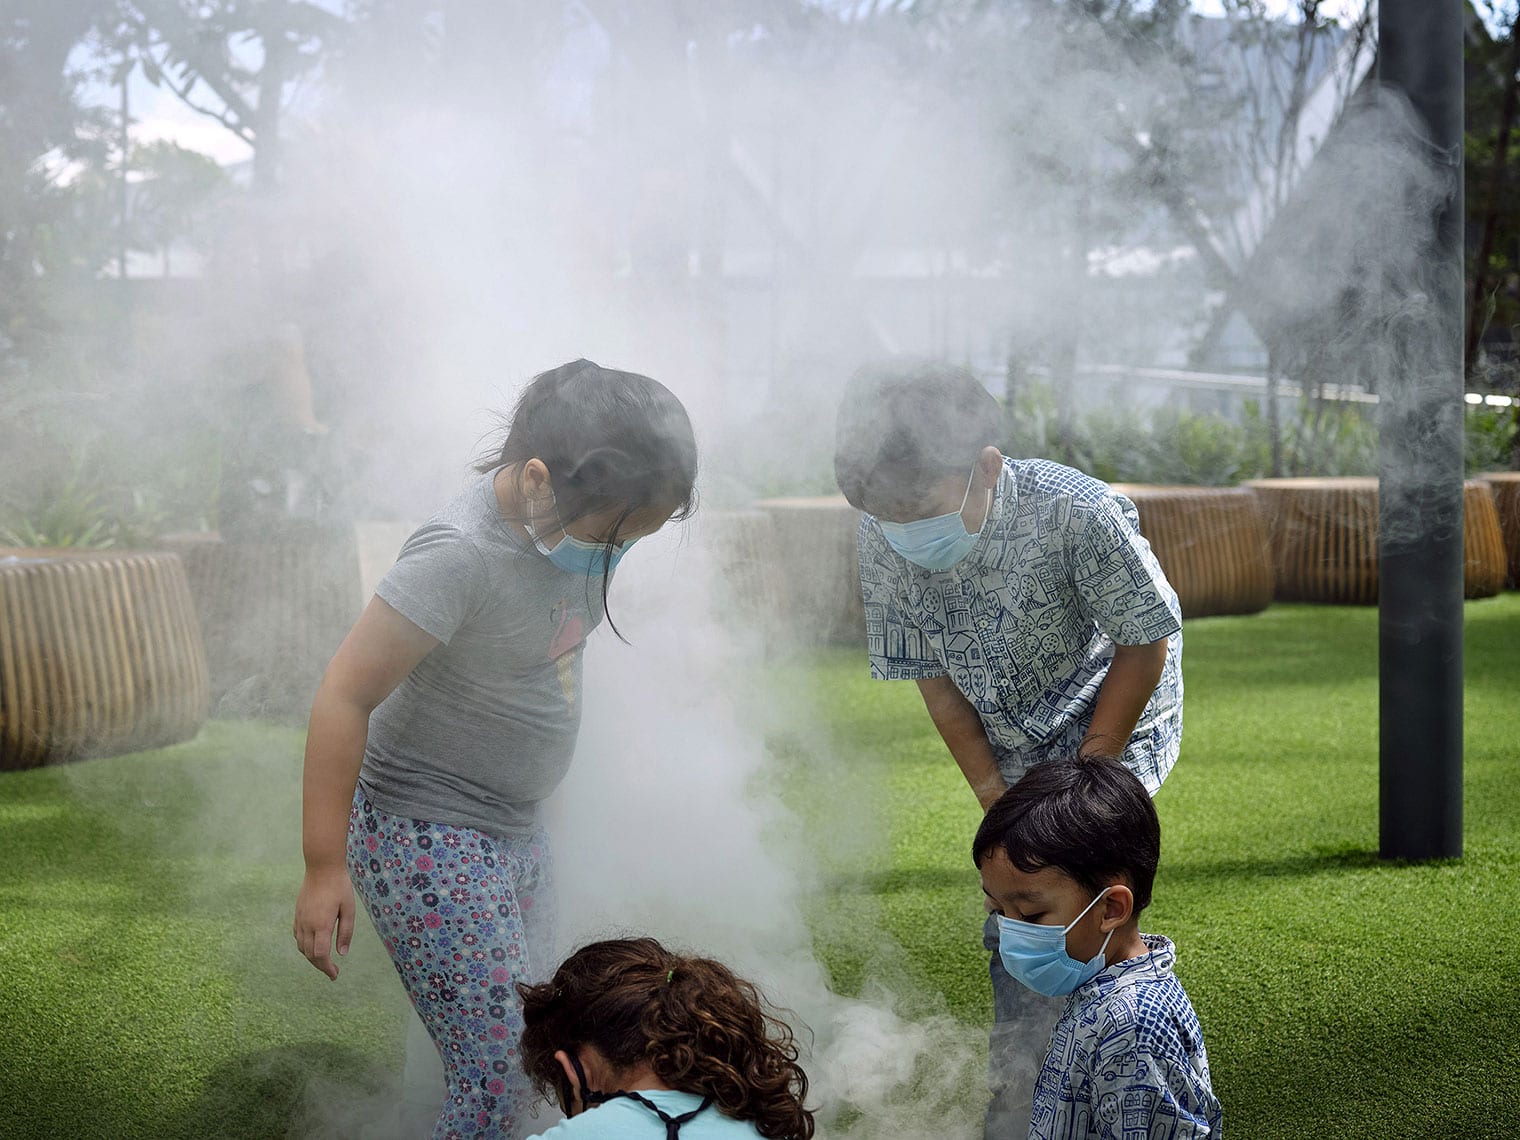 Four masked children stand on astroturf, looking at the ground and surrounded by mist